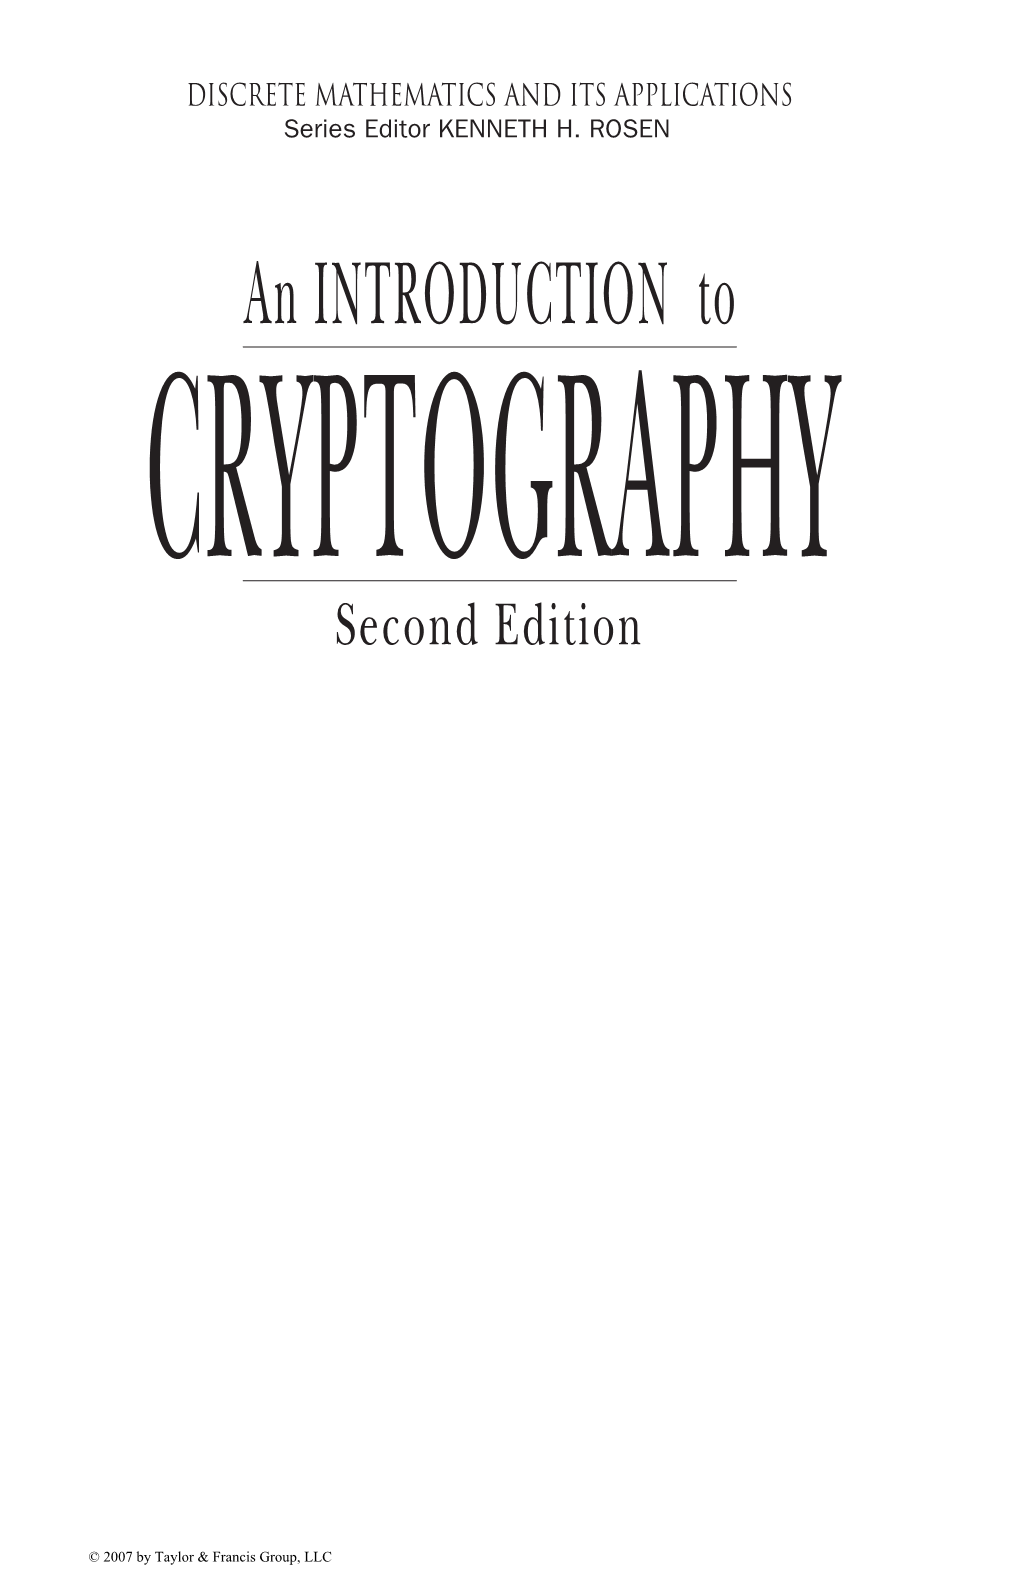 An Introduction to Cryptography, Second Edition Richard A